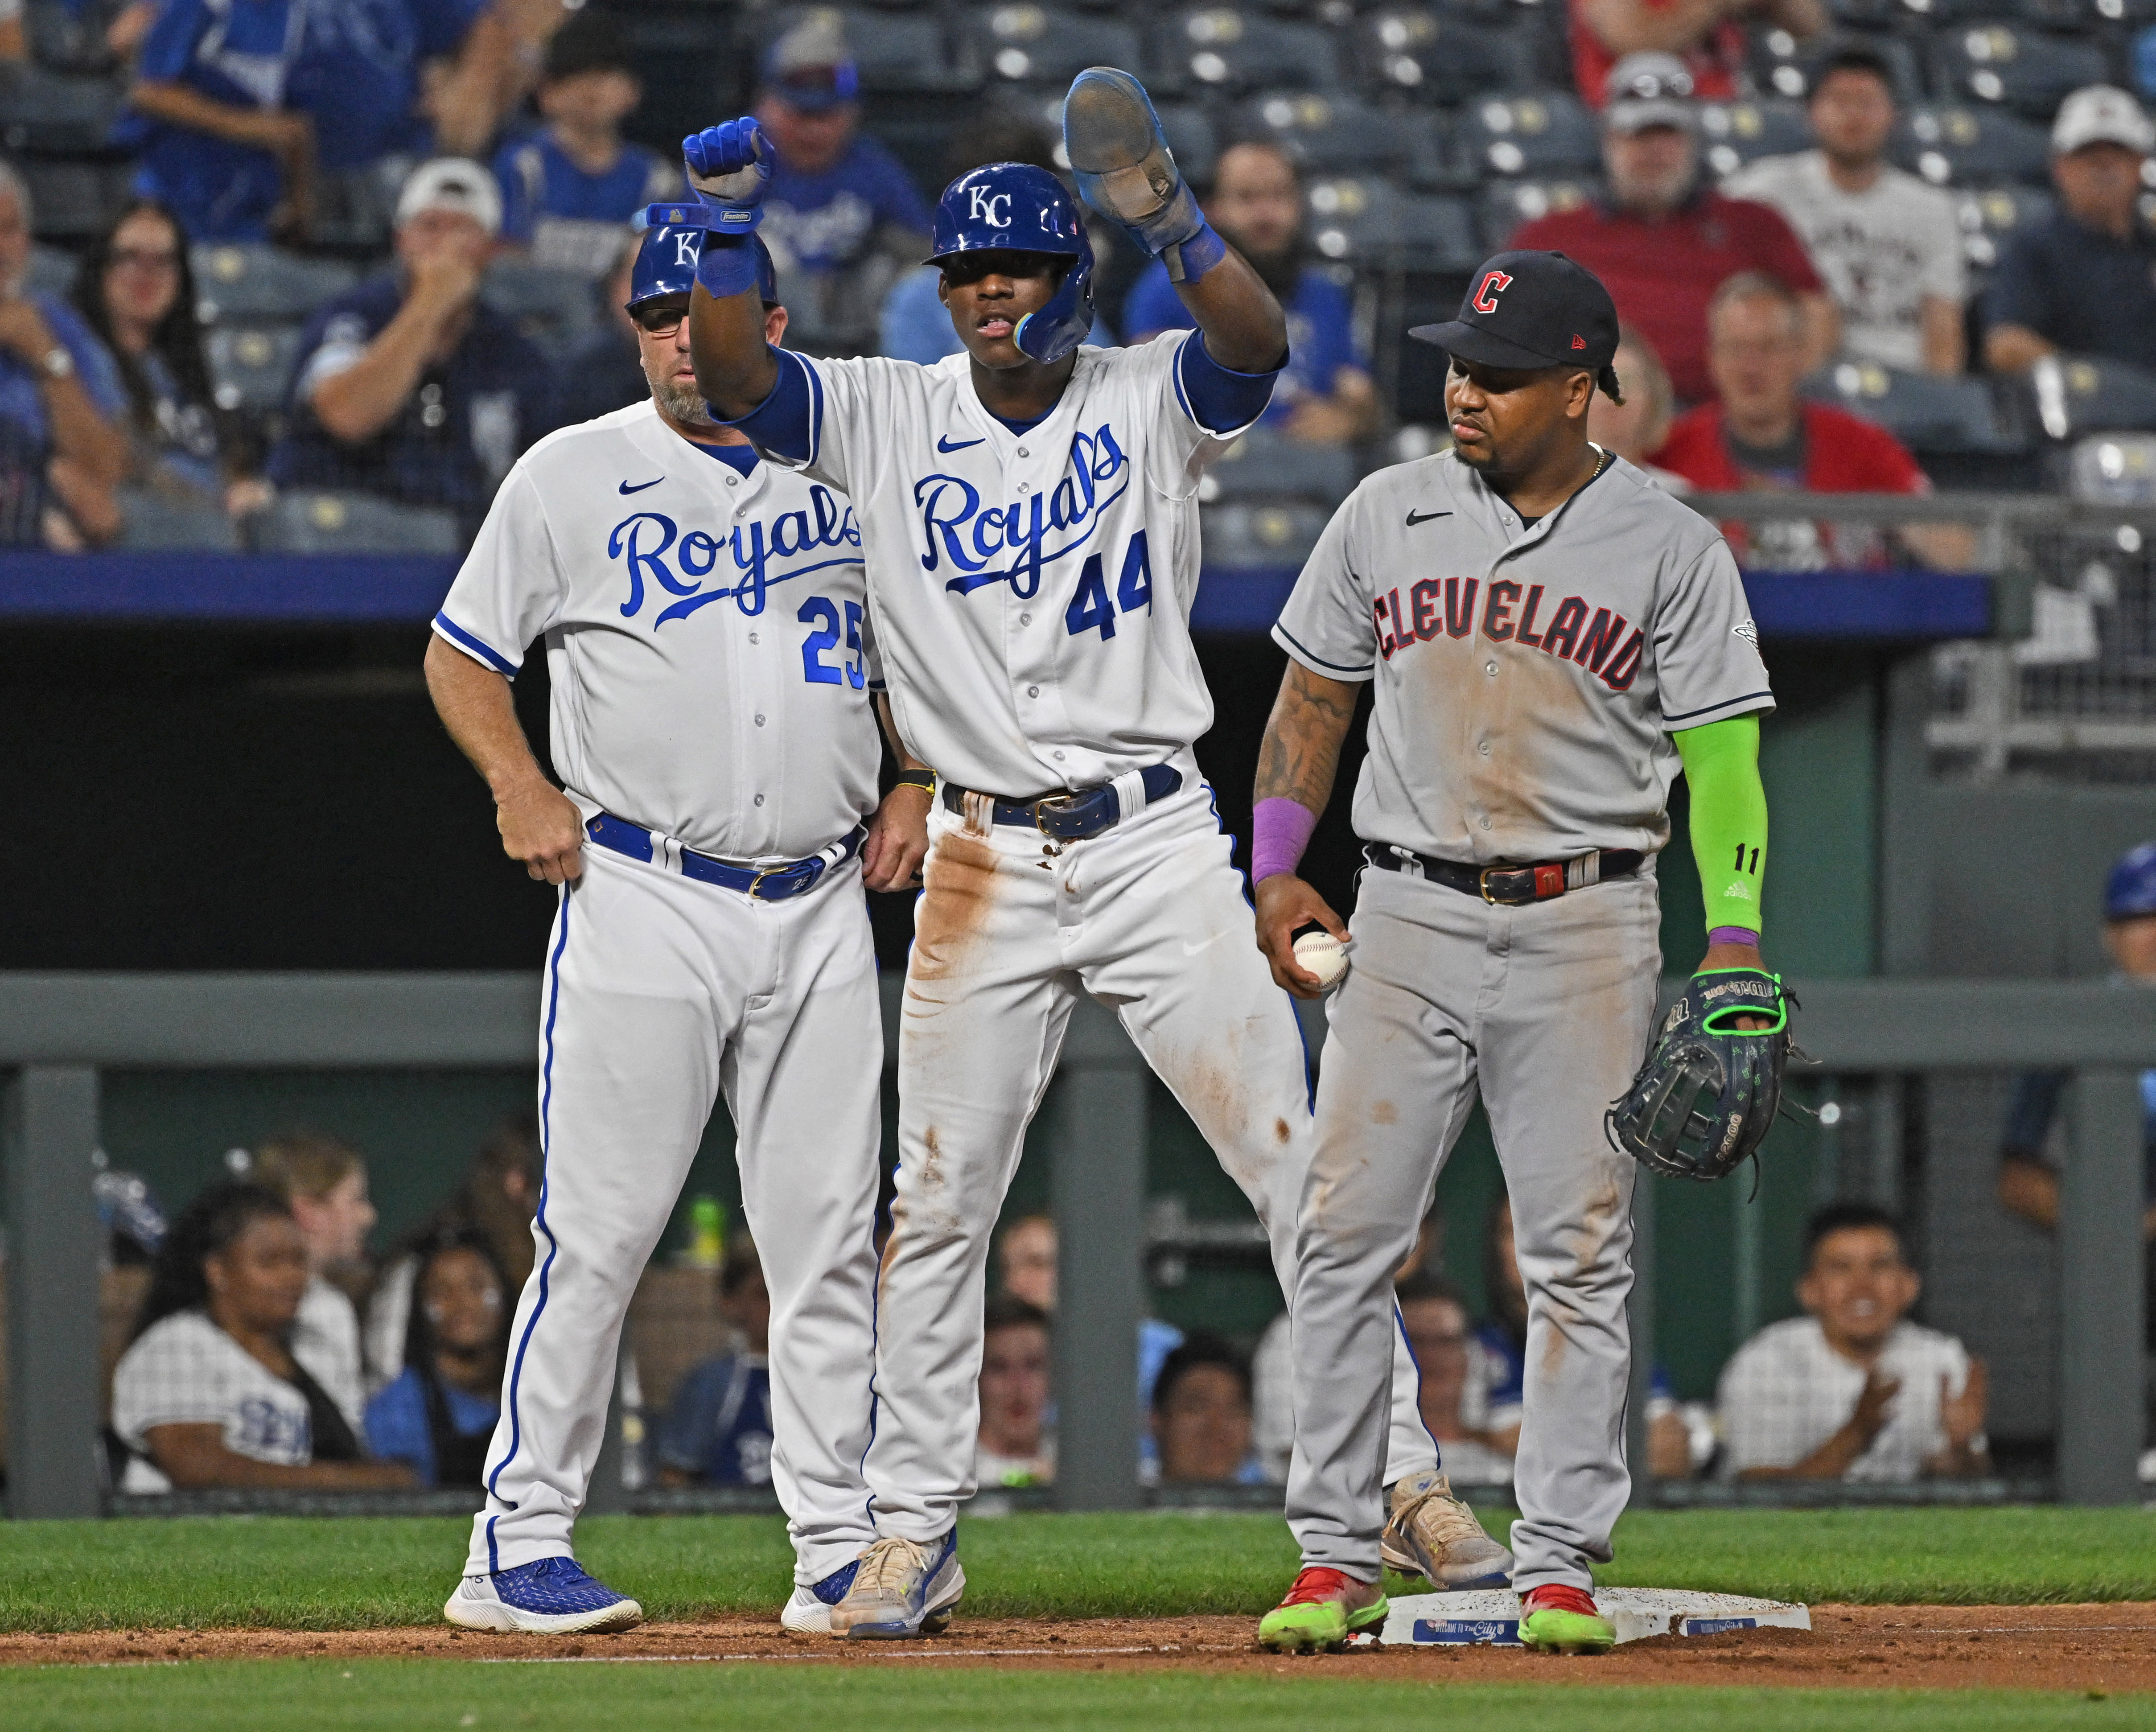 Ninth-inning double drives Guardians past Royals